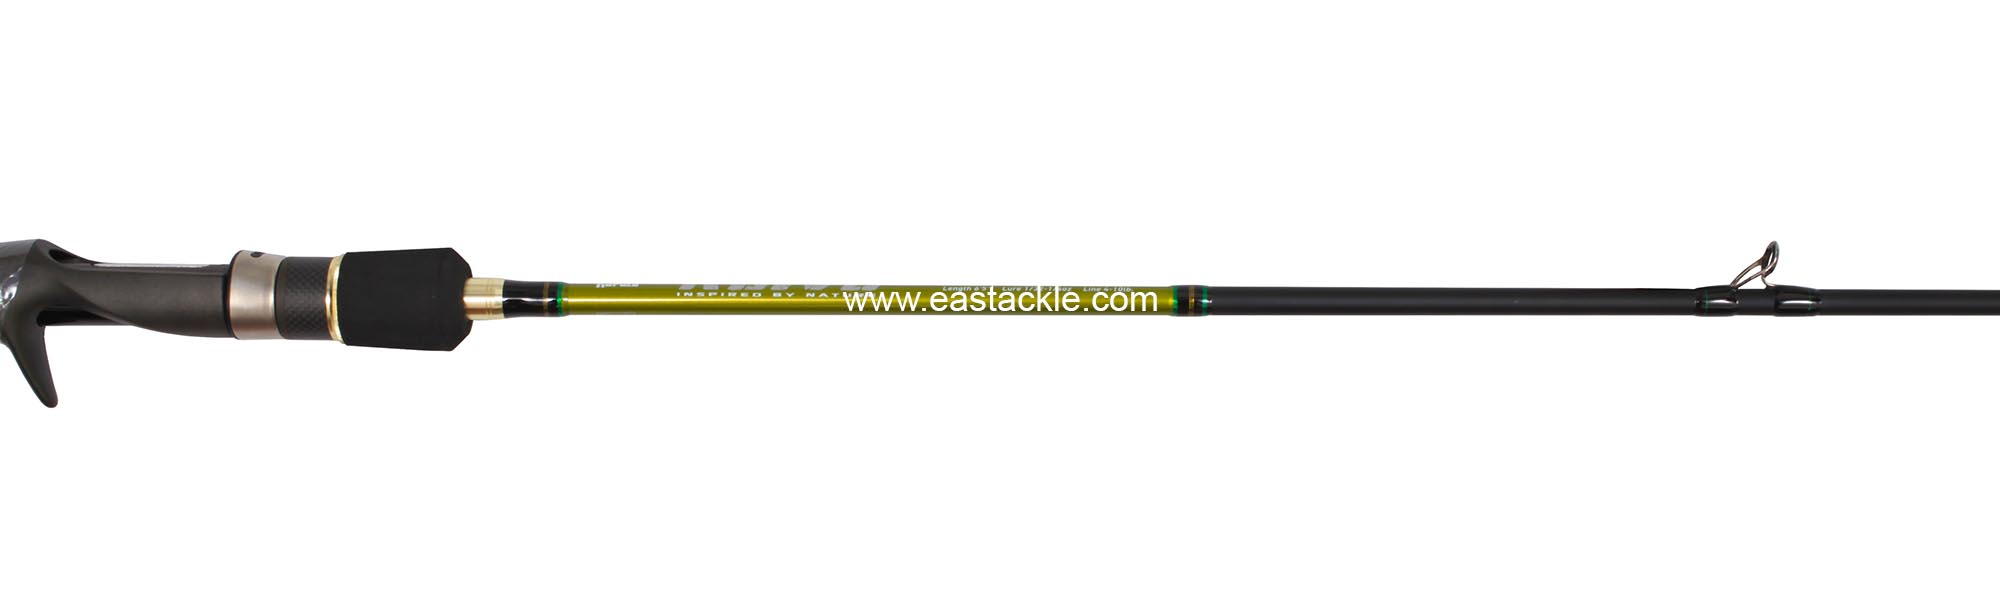 Rapala - Koivu - KVC662MH - Bait Casting Rod - Reel Seat Fore Grip to Stripper Guide (Side View) | Eastackle